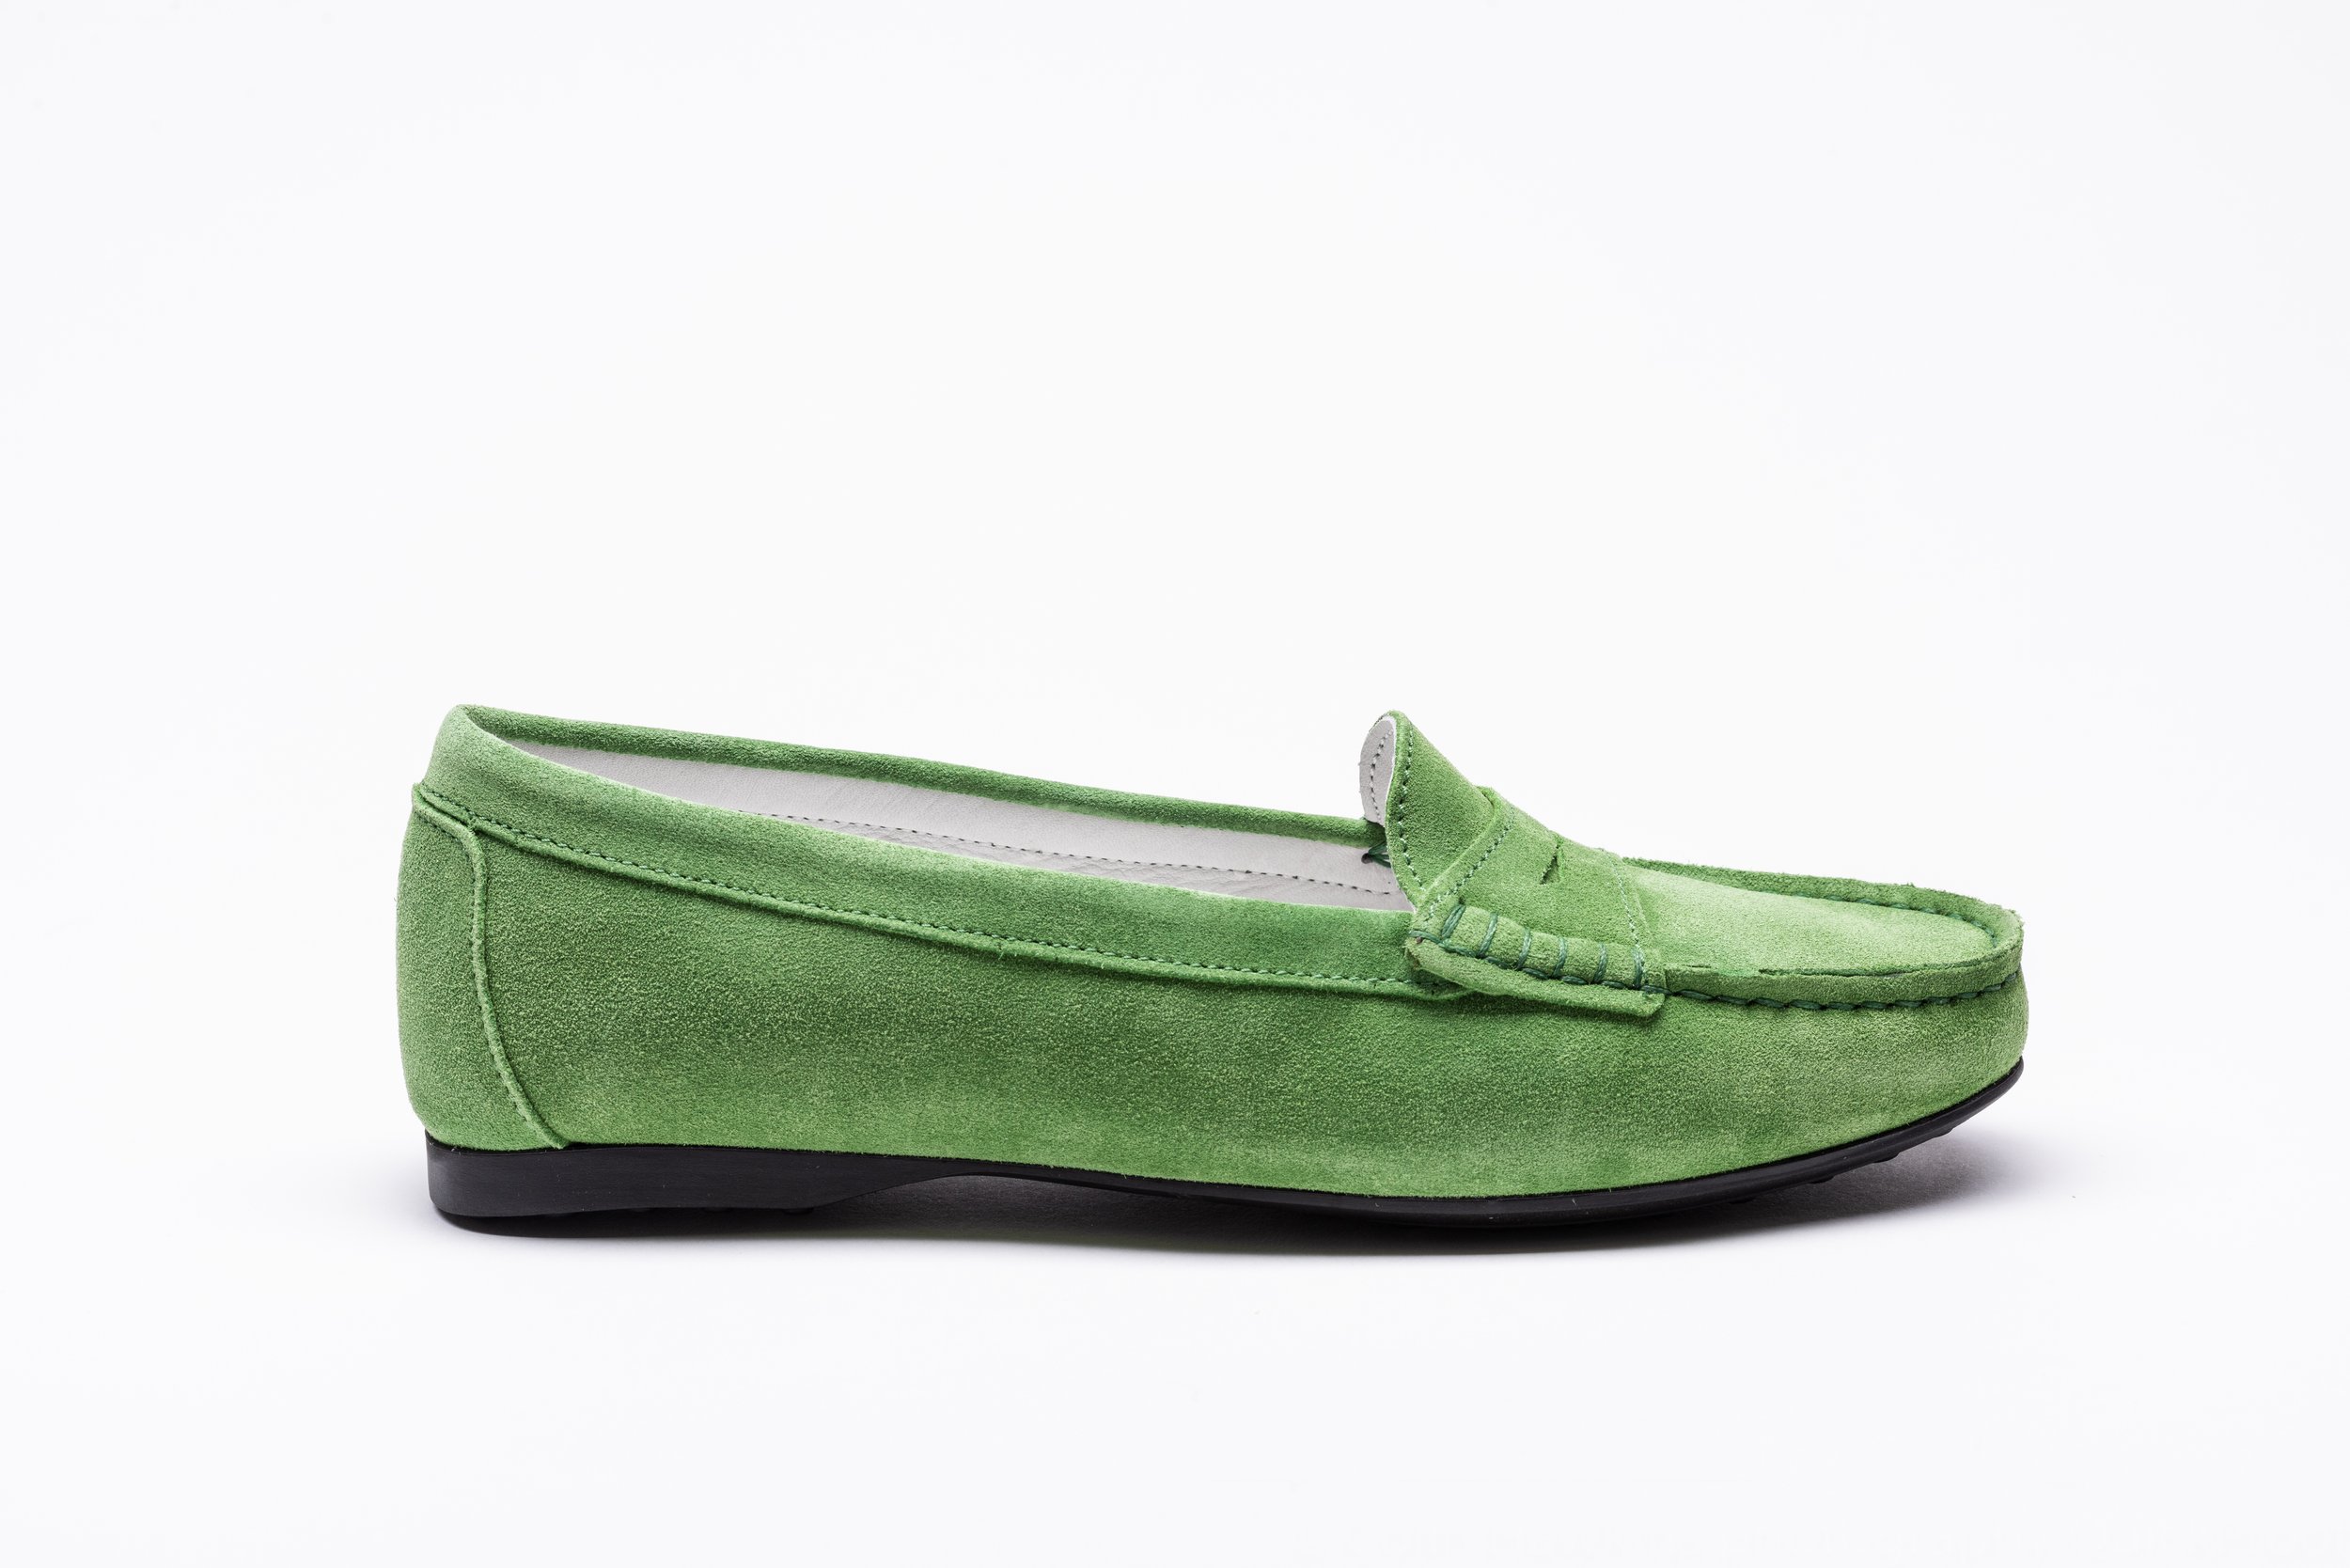 Ladies Green/Blue Suede Moccasins handmade in the UK Shoes Womens Shoes Slippers 